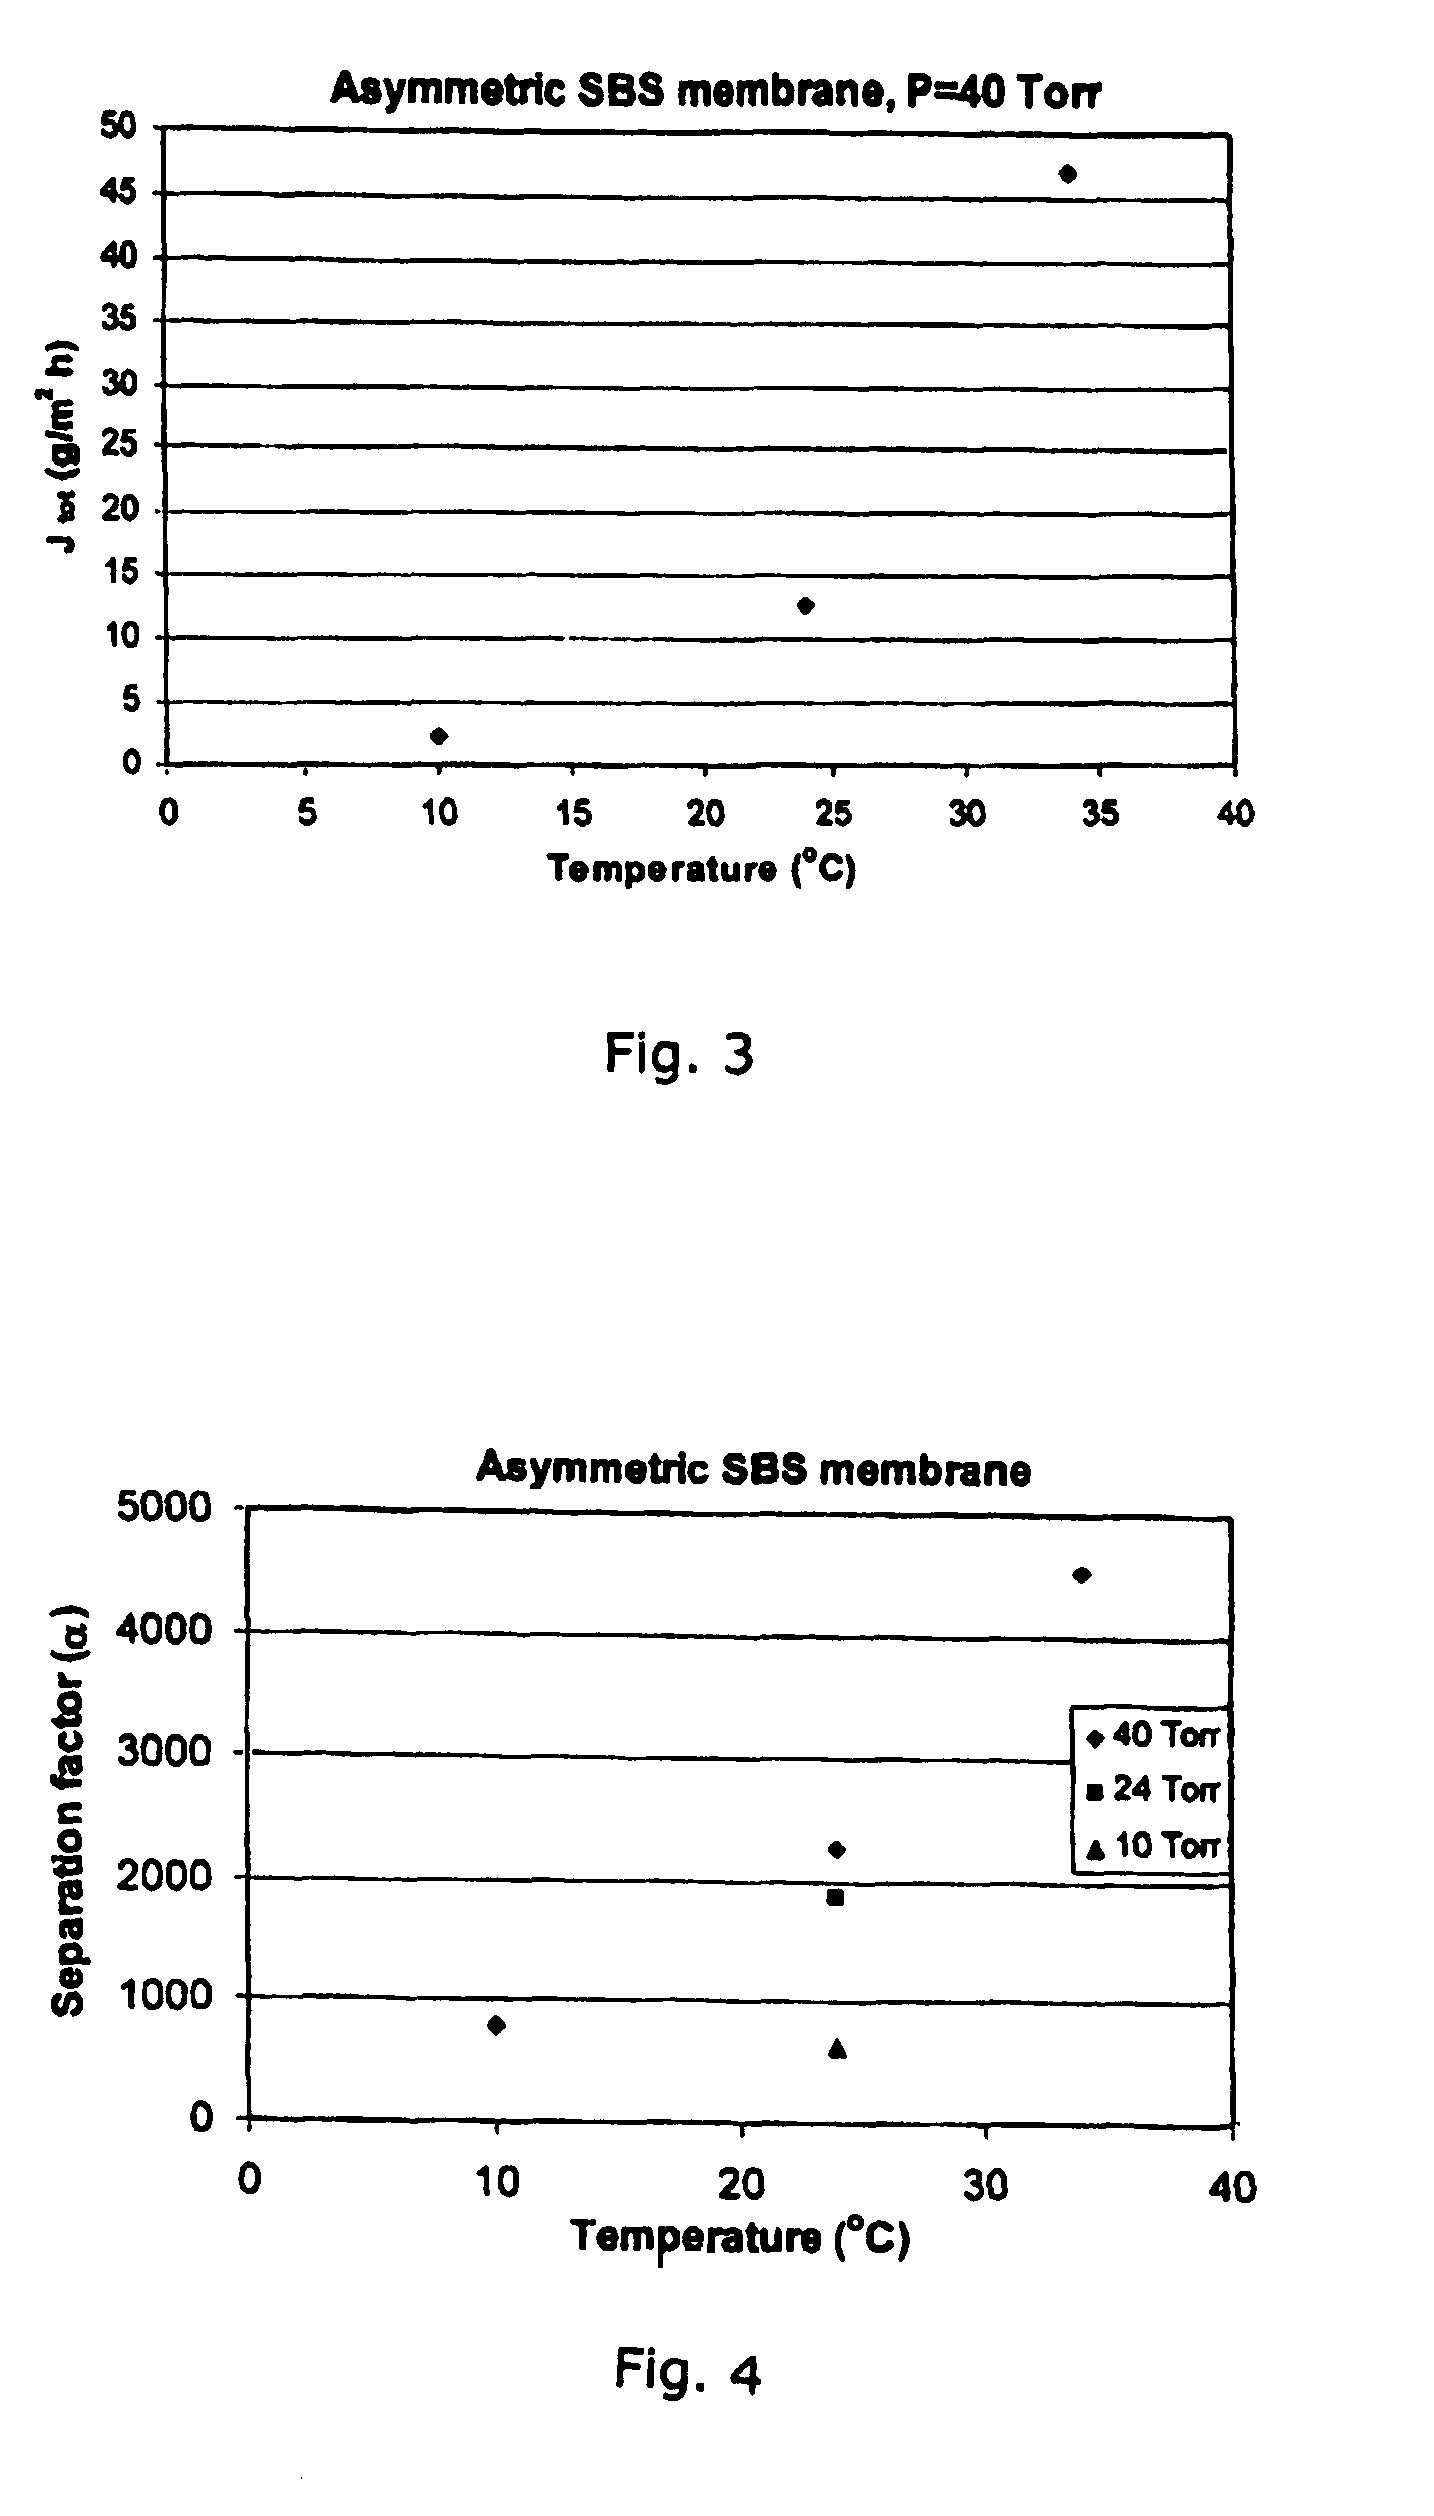 Method for fabrication of elastomeric asymmetric membranes from hydrophobic polymers